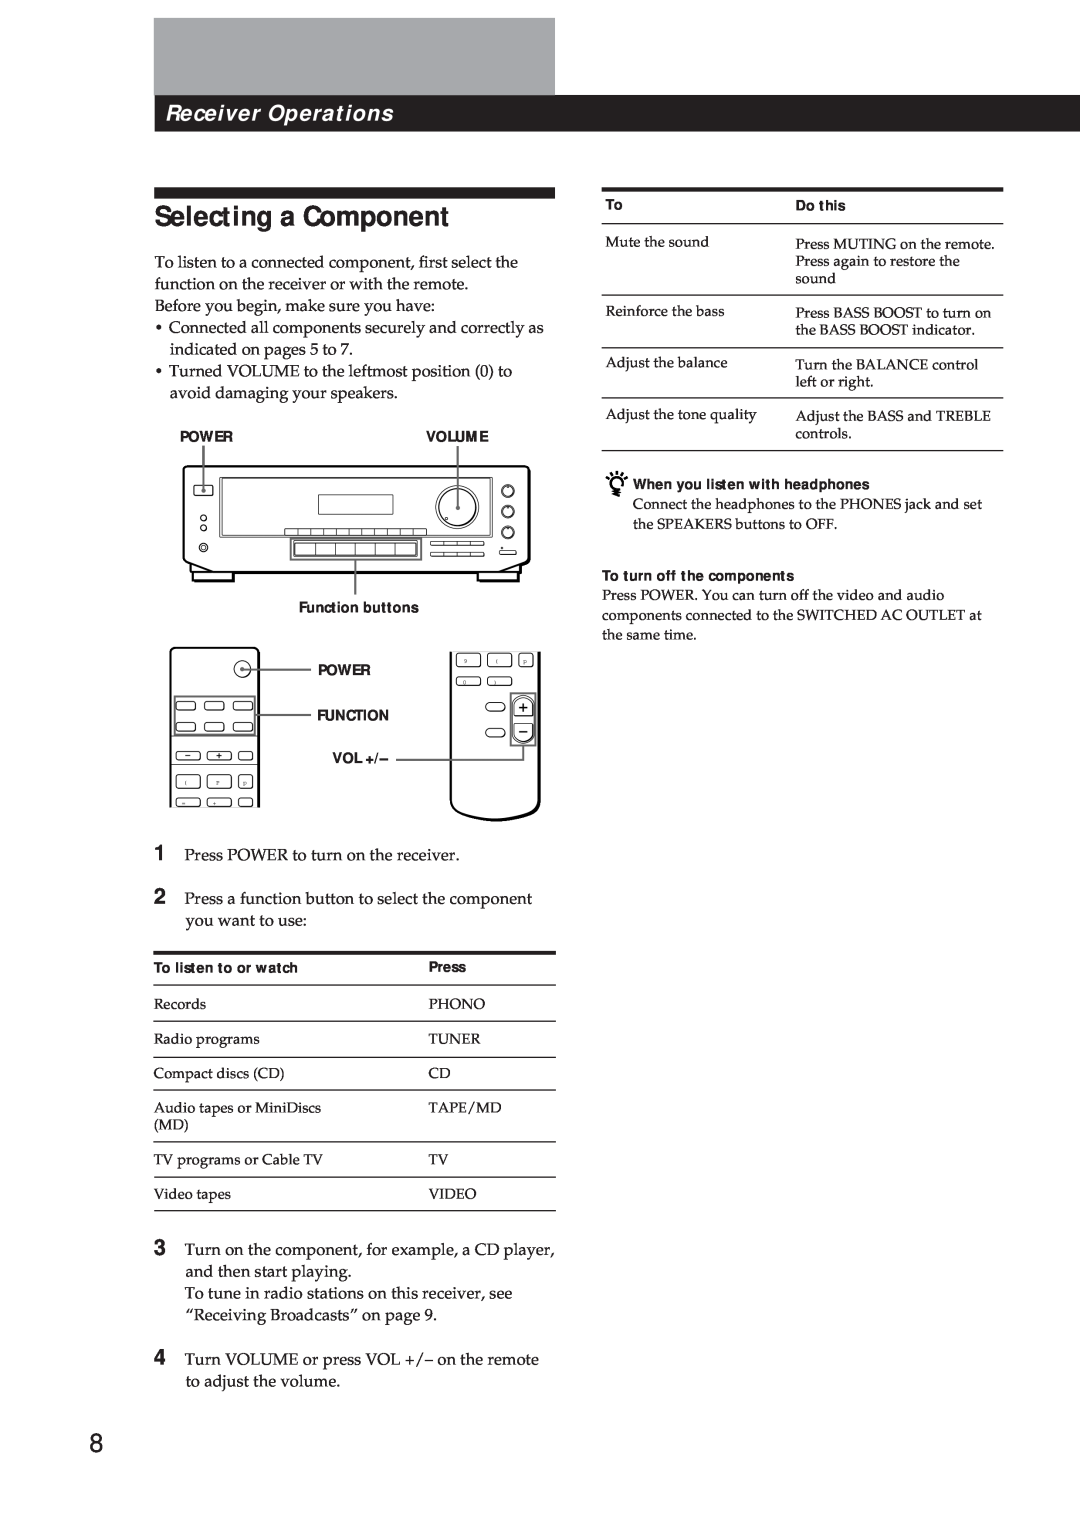 Sony STR-DE310 manual Selecting a Component, Receiver Operations, Do this, To listen to or watch, Press 